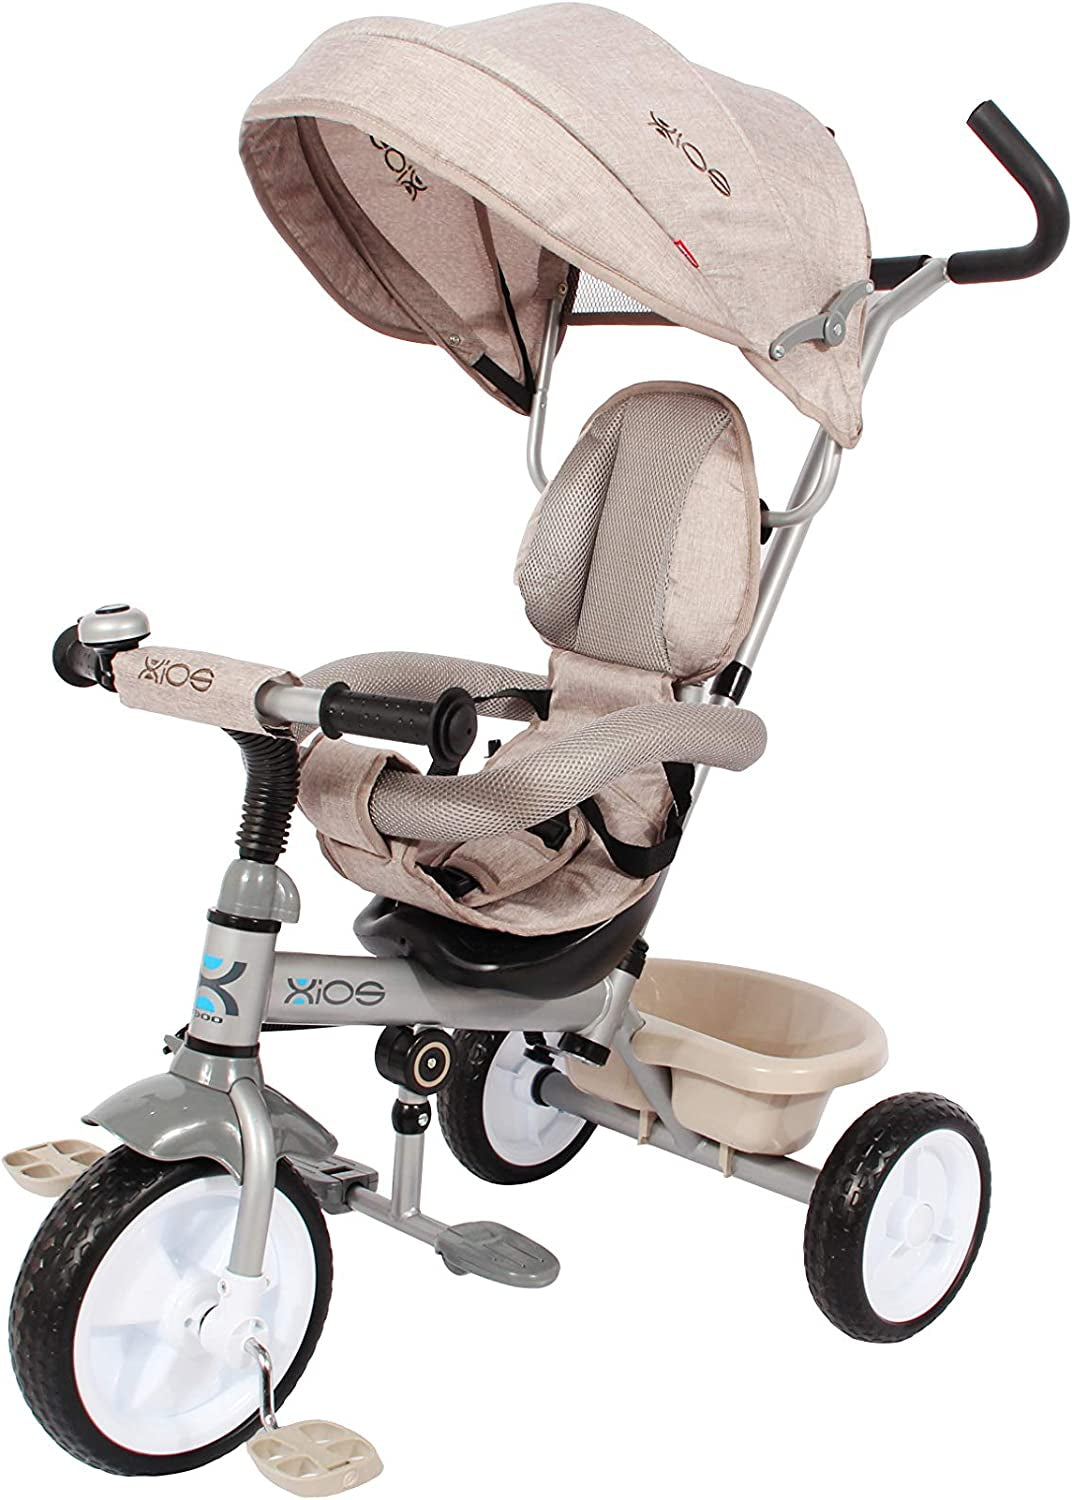 Kids Easy Steer Pedal Tricycle Buggy Stroller with Oxford Cloth ( XG18859) (Biege)